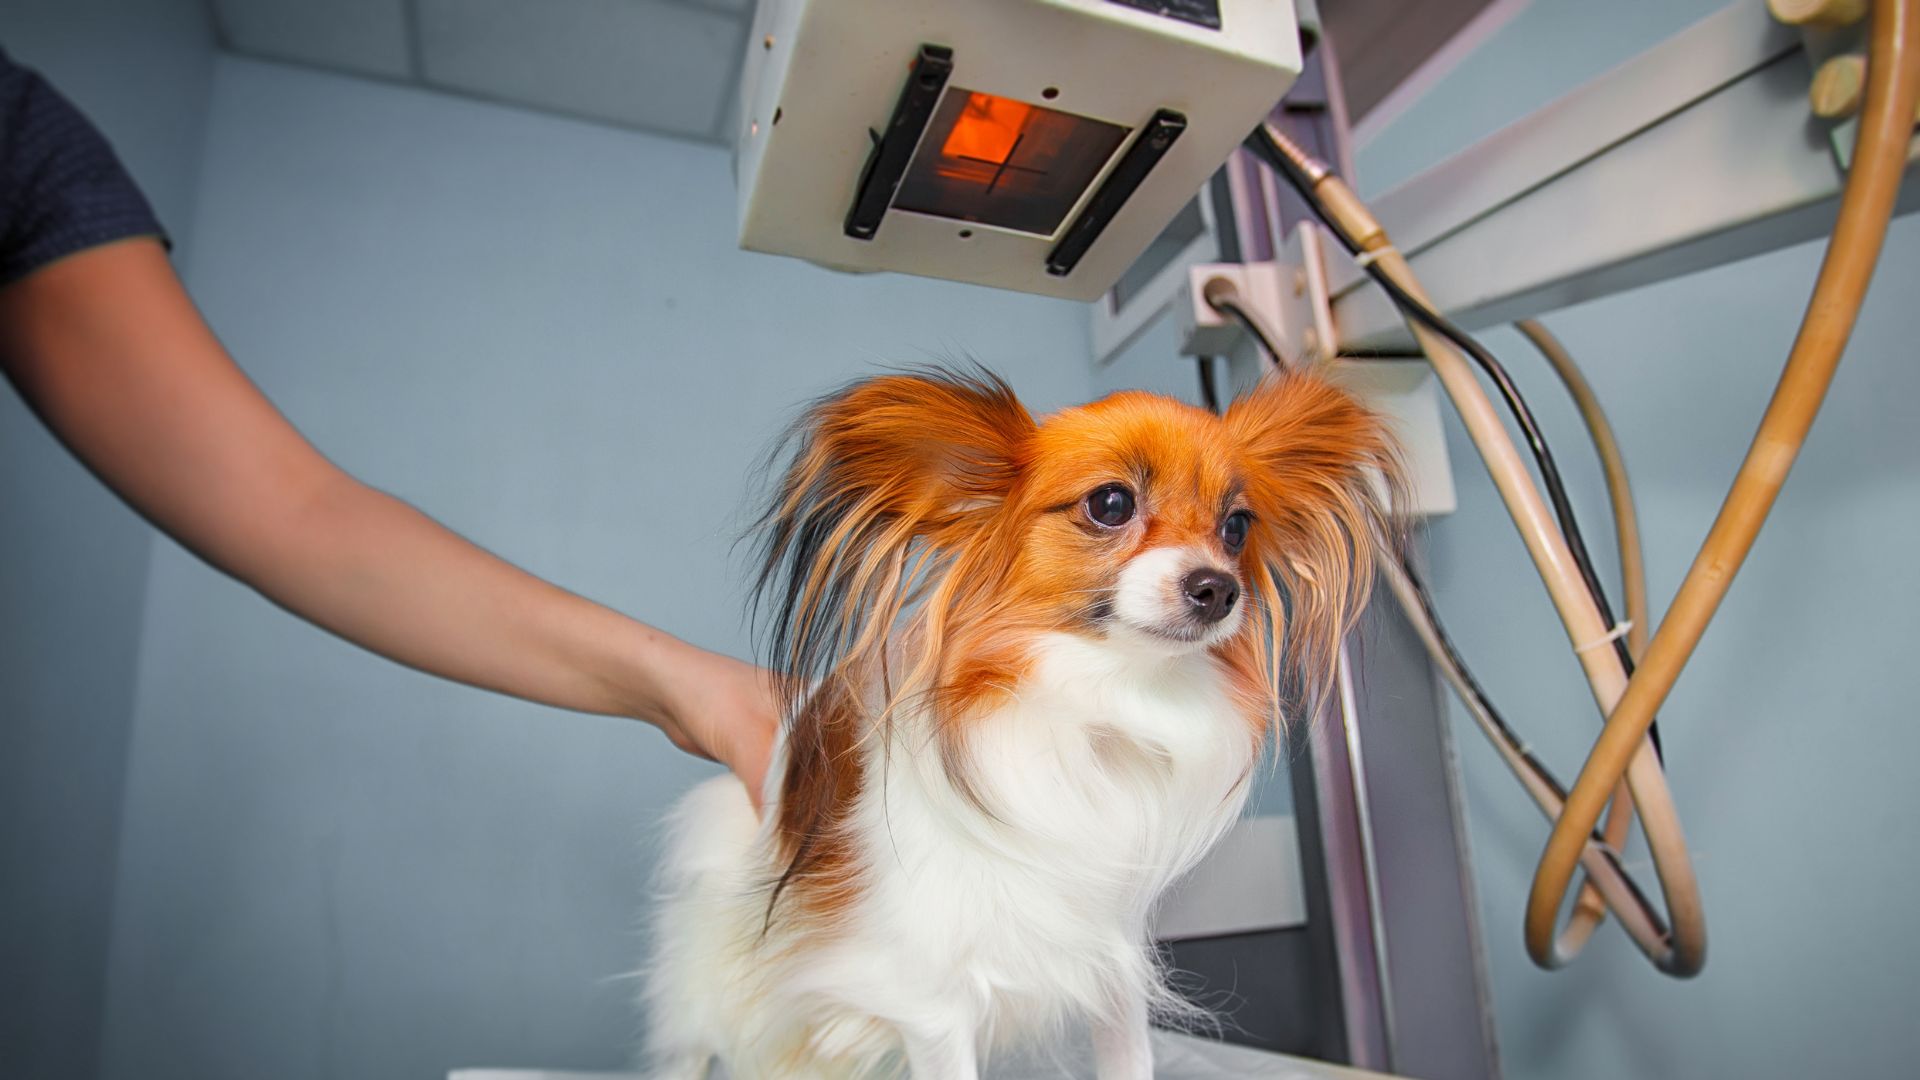 Dog receiving an x-ray at a veterinary clinic. doctor examining dog in x-ray room.